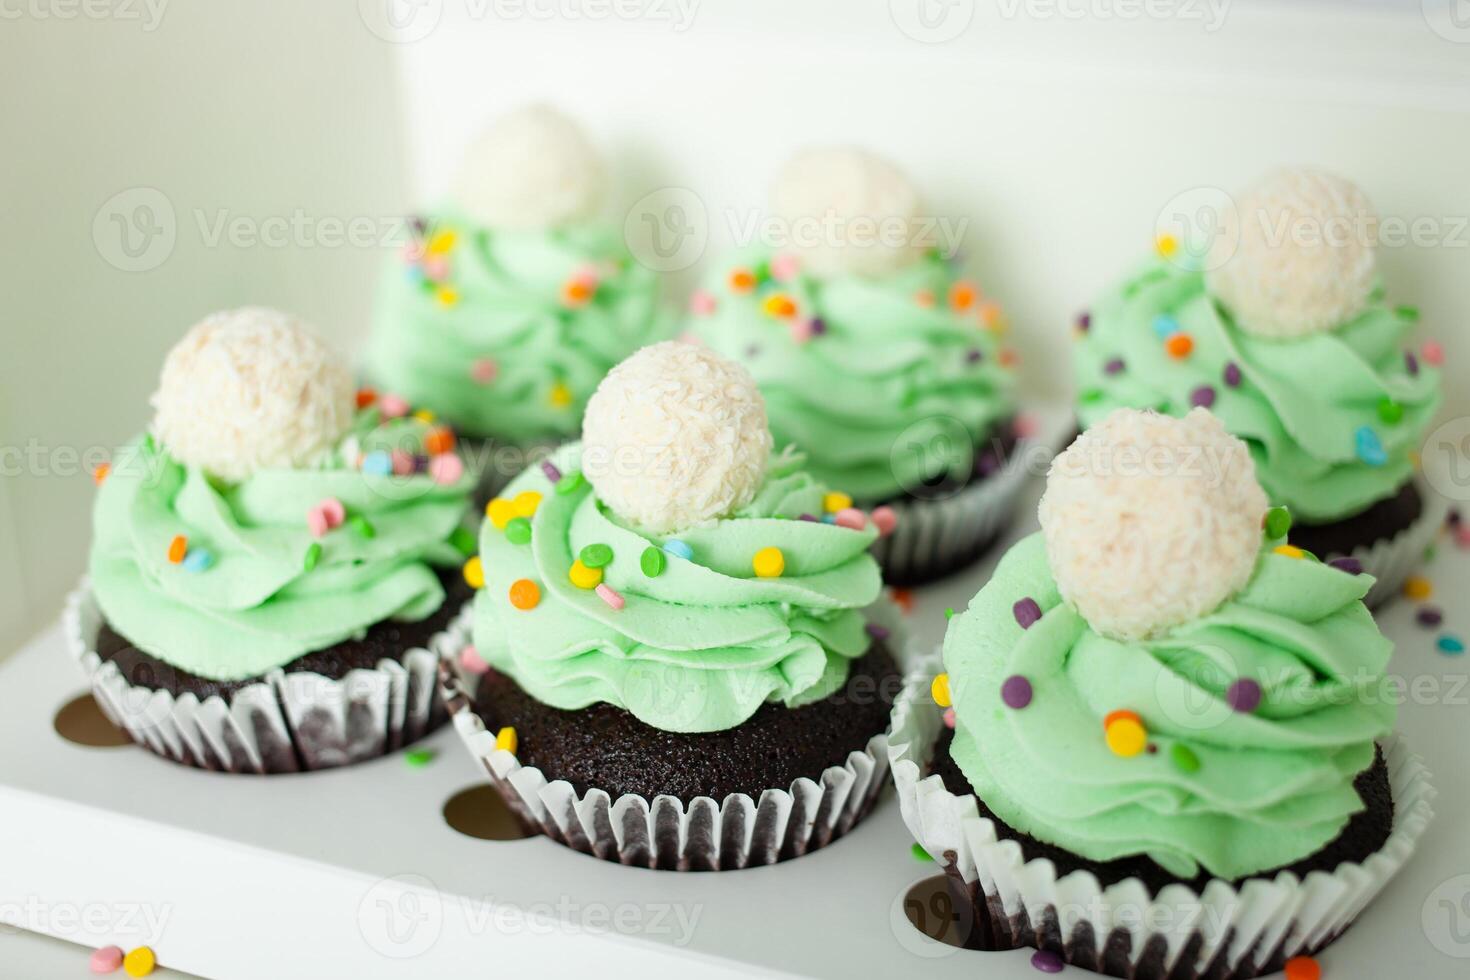 pastry chef professional prepared cupcakes in form of Christmas trees. Delicious sweets for any holiday, gift. Green whipped cream. photo